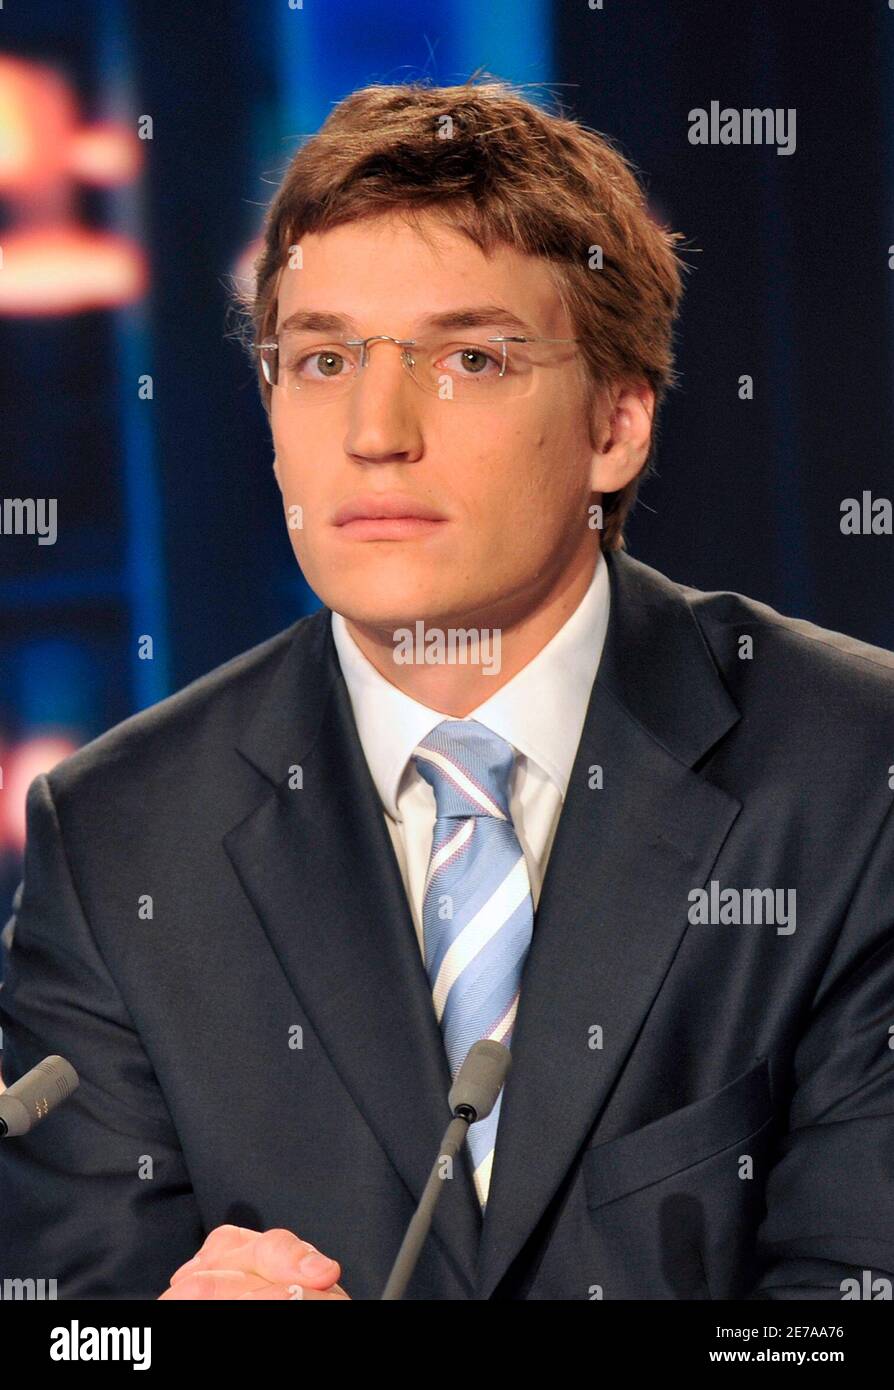 Jean Sarkozy, the 23-year-old son of French President Nicolas Sarkozy waits  for the start of France2 television evening news at their studios in  Boulogne-Billancourt to announce that has given up his bid